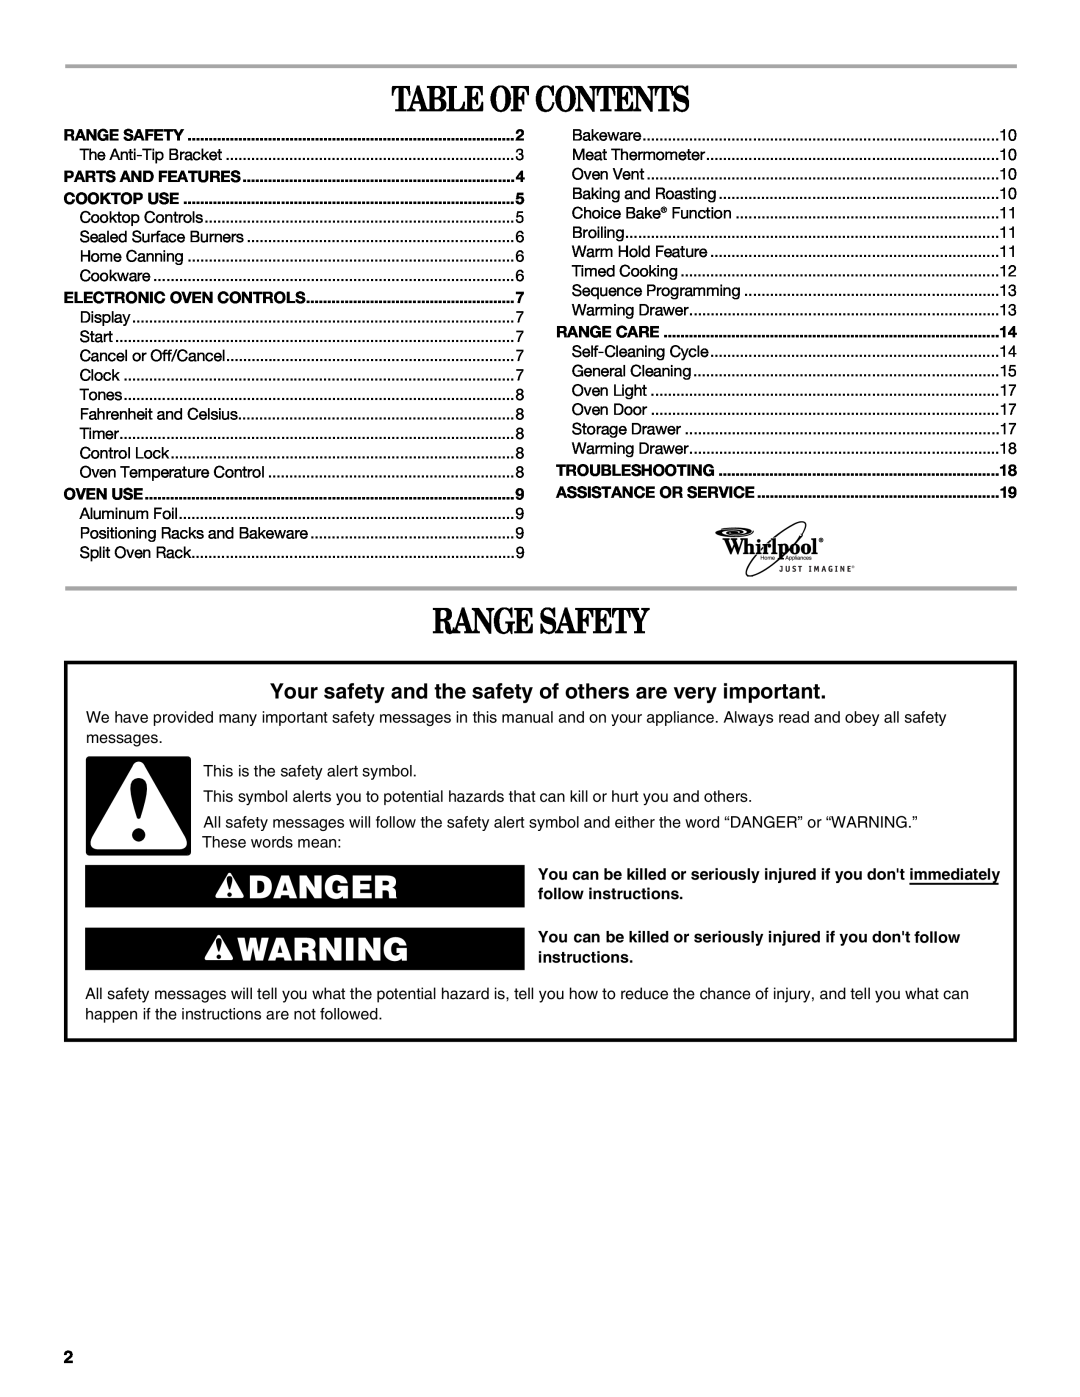 Whirlpool 9762363A manual Table Of Contents, Range Safety, Danger 